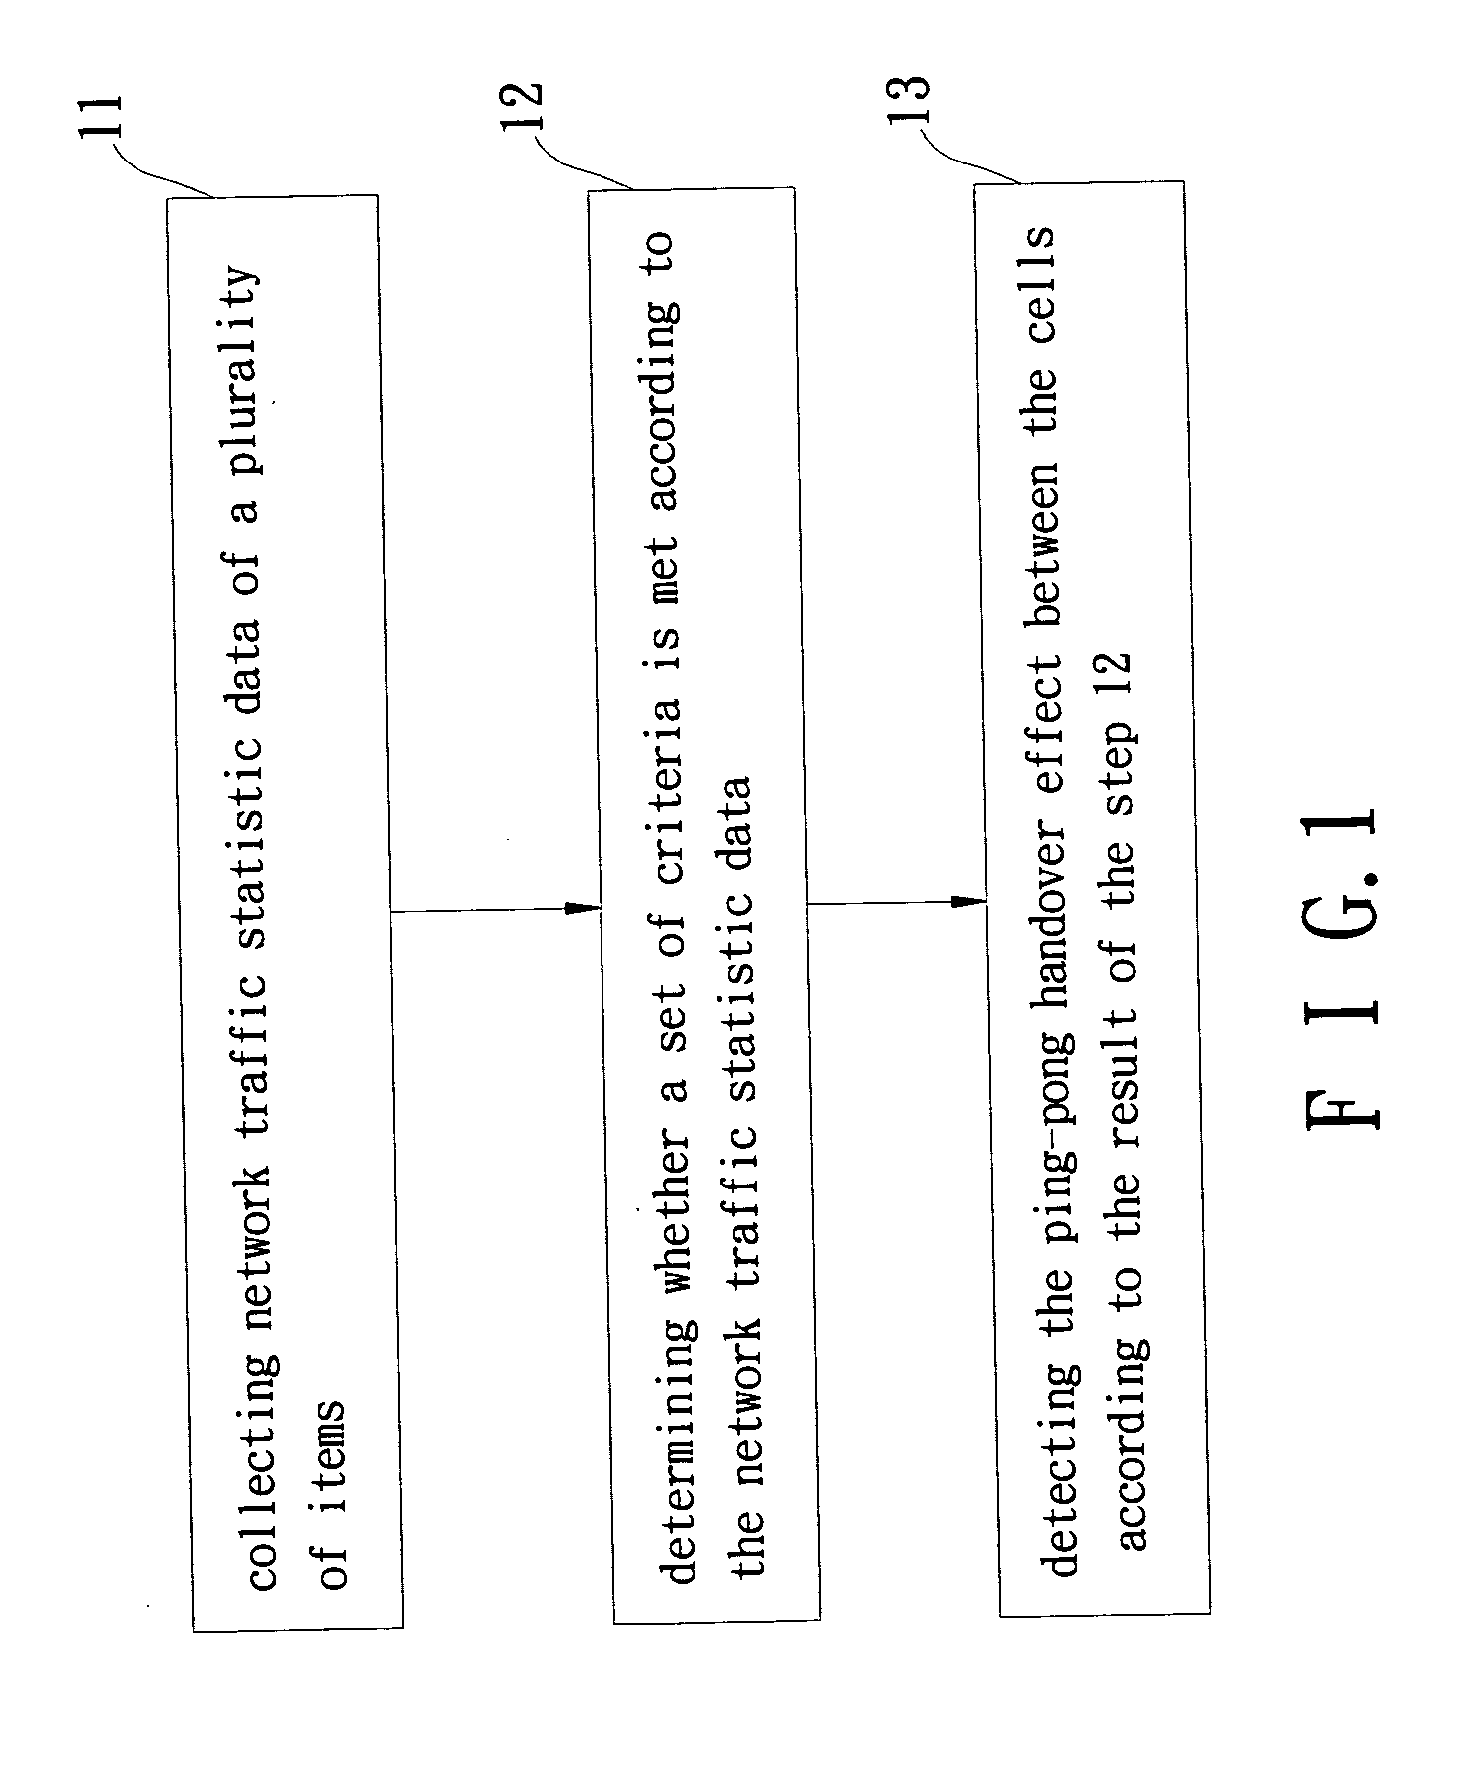 Method for detecting and reducing ping-pong handover effect of cellular network